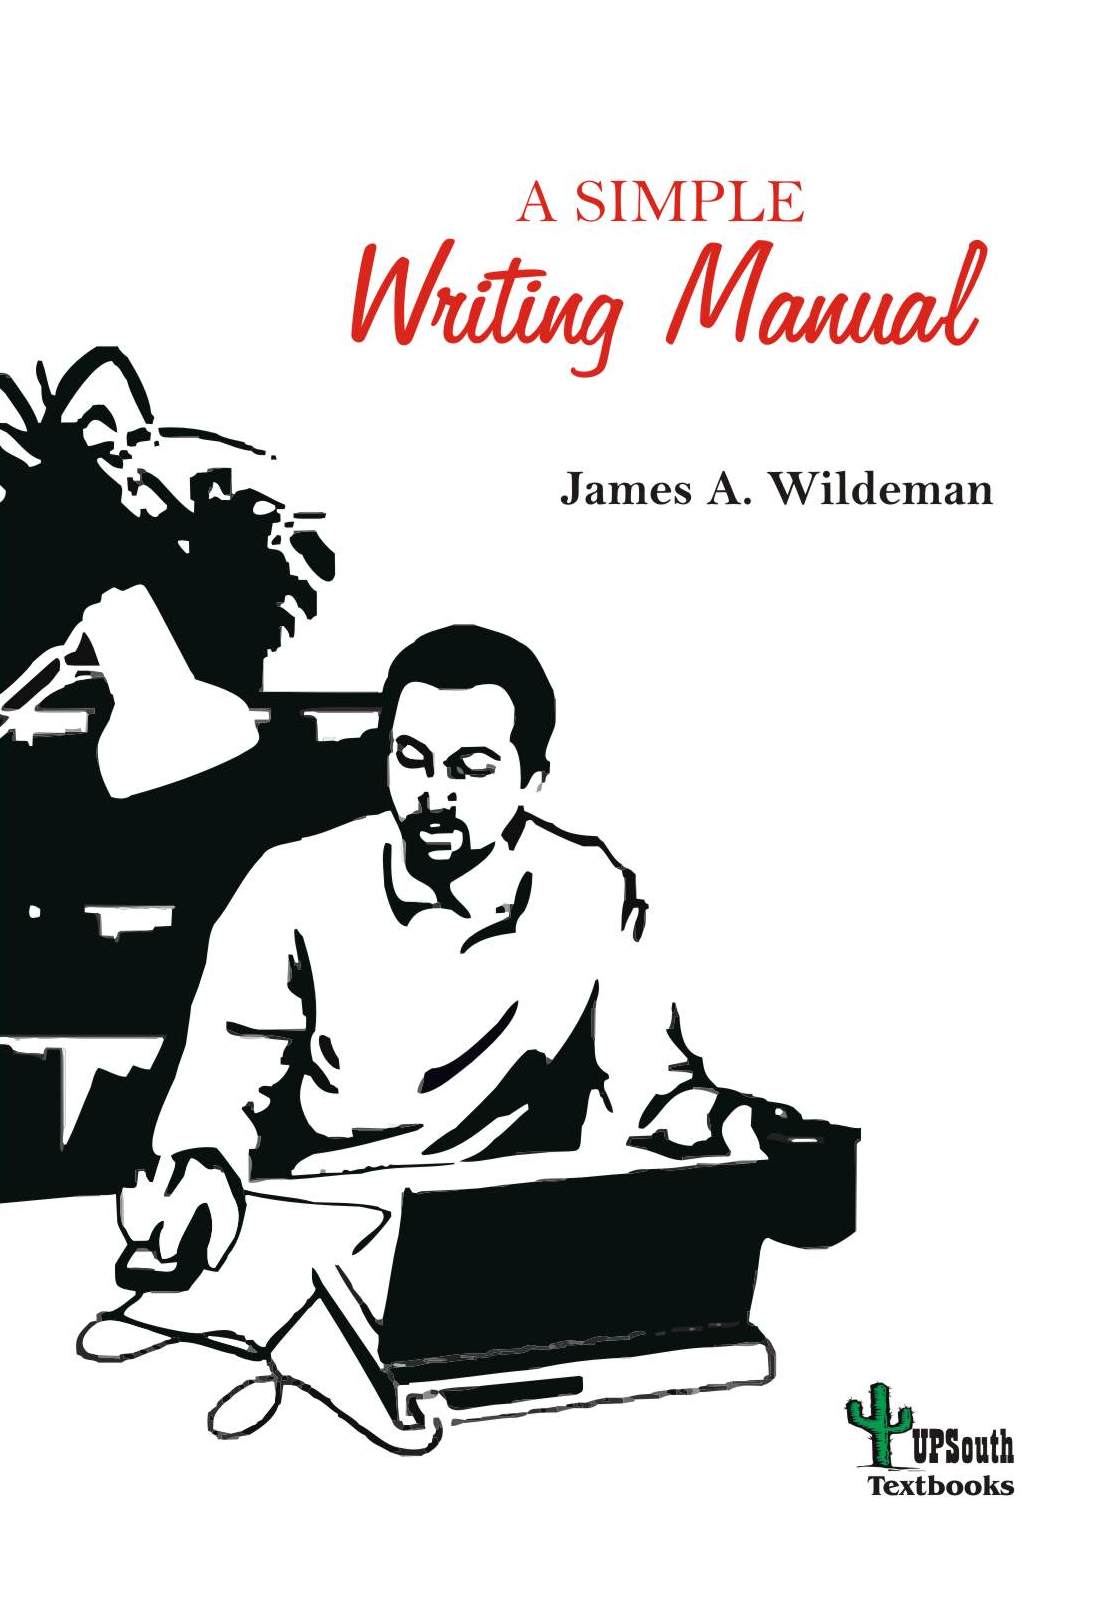 A Simple Writing Manual.